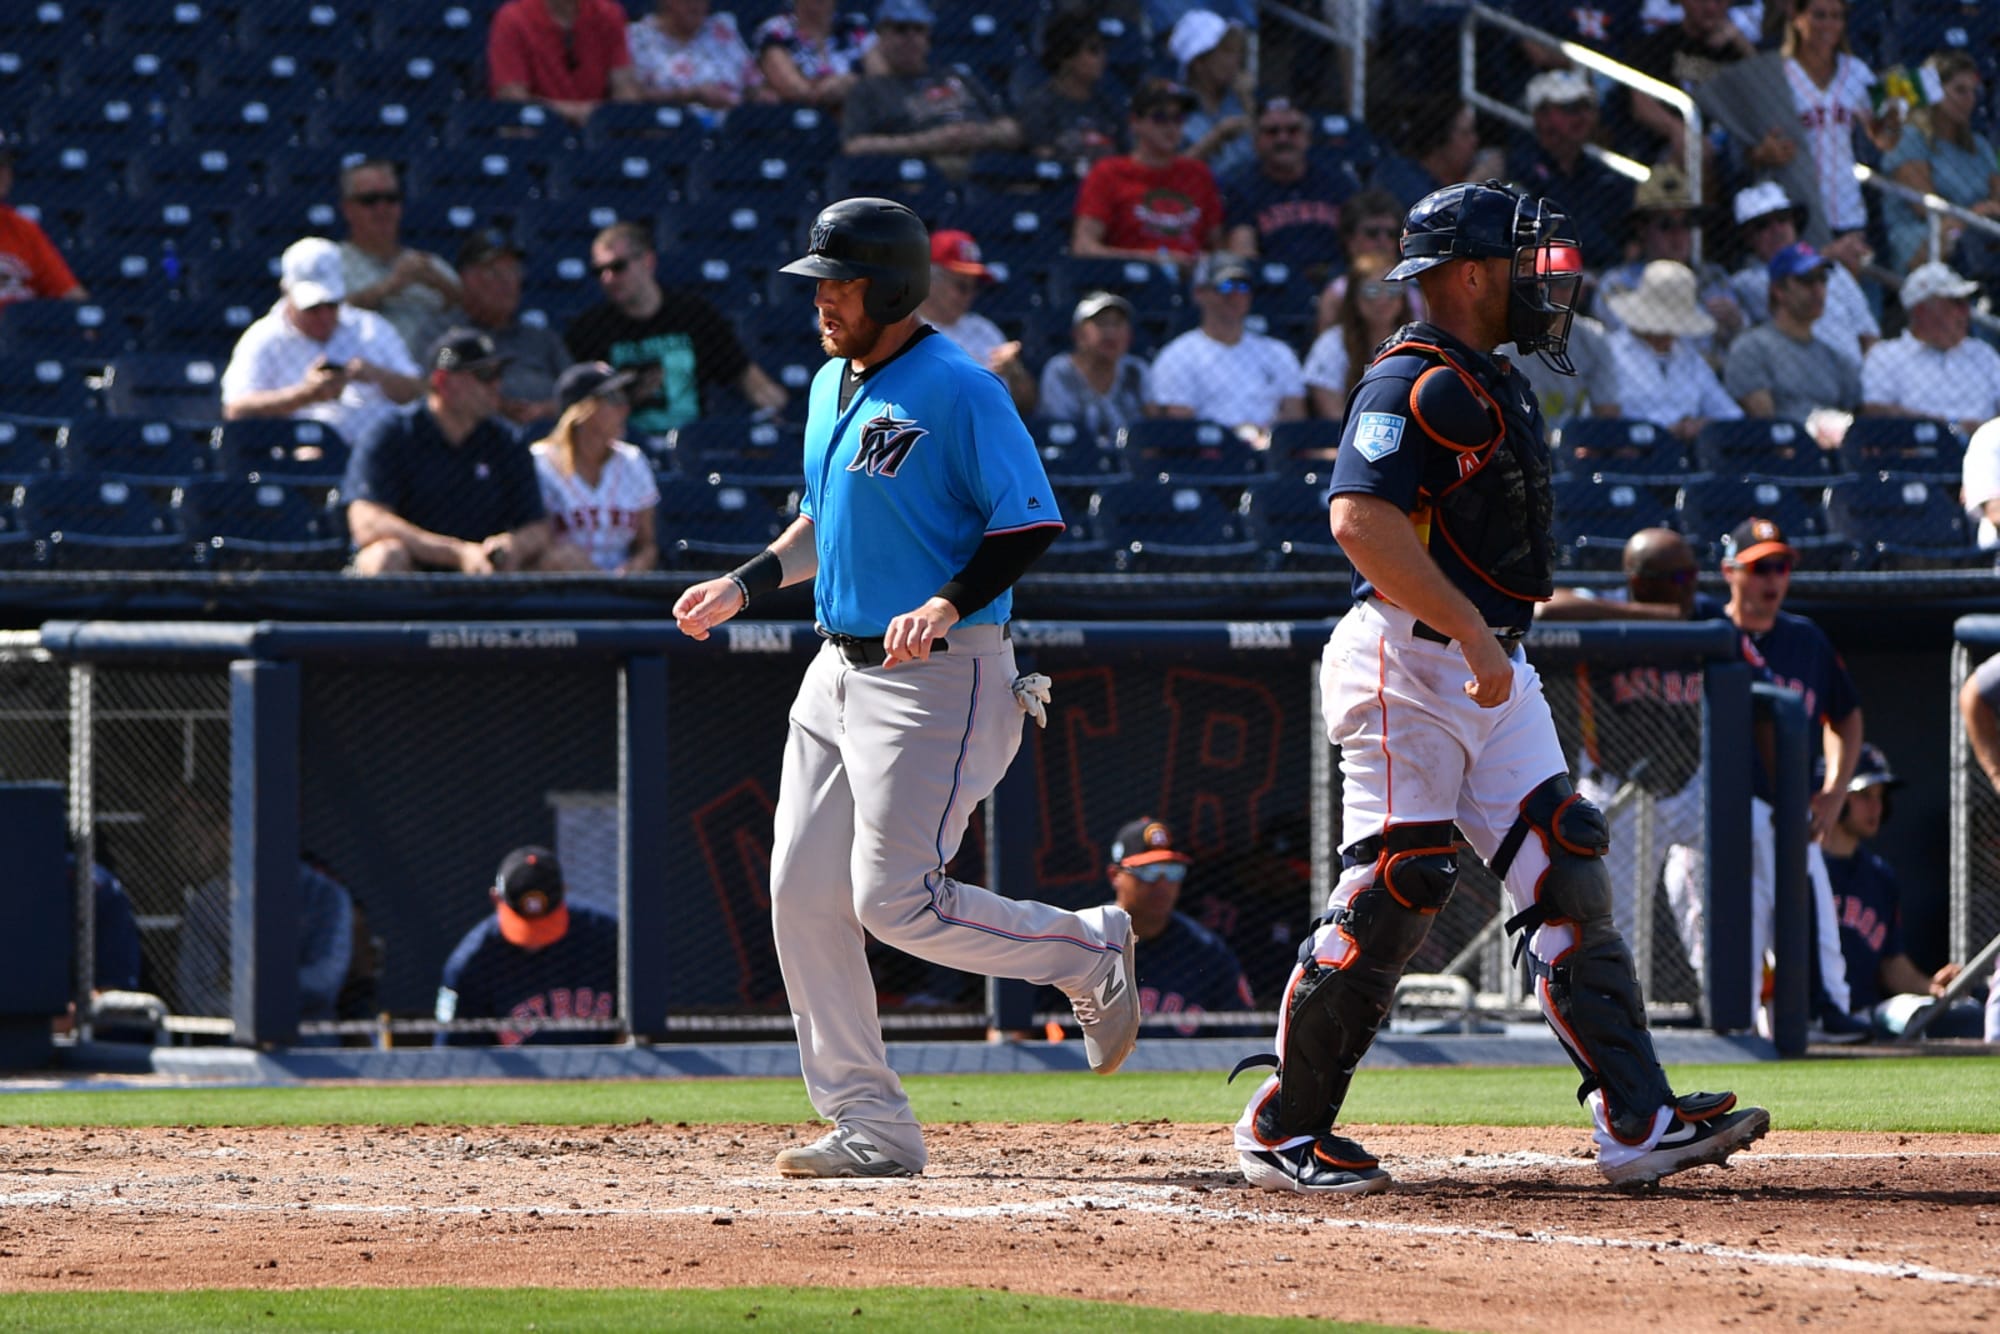 The Marlins minor league system will define the team's future